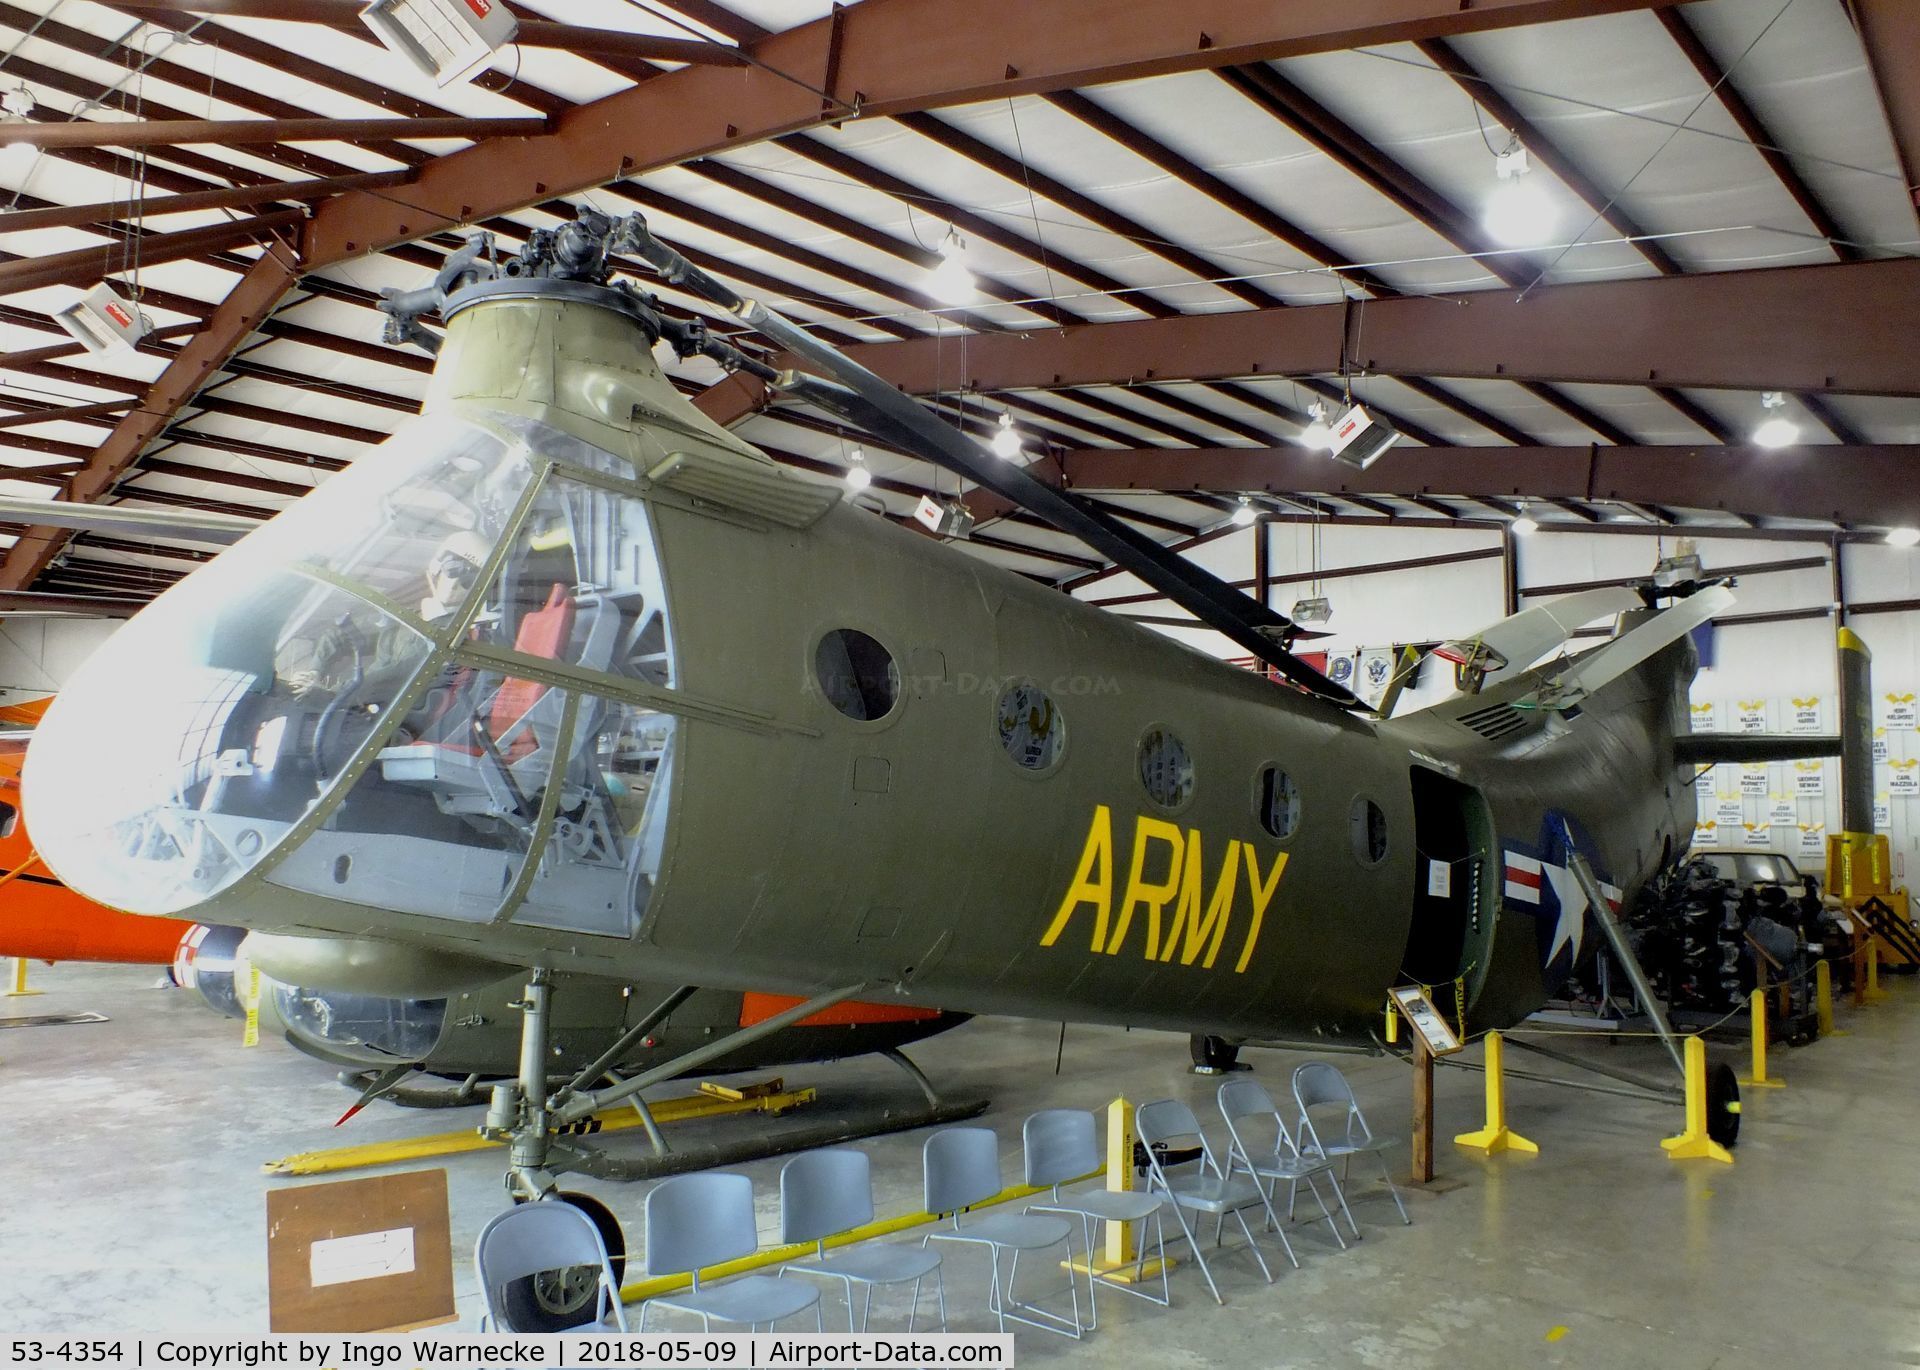 53-4354, 1953 Piasecki CH-21B Workhorse C/N B.104, Piasecki CH-21C Workhorse/Shawnee, displayed as 55-4154 at the Arkansas Air & Military Museum, Fayetteville AR